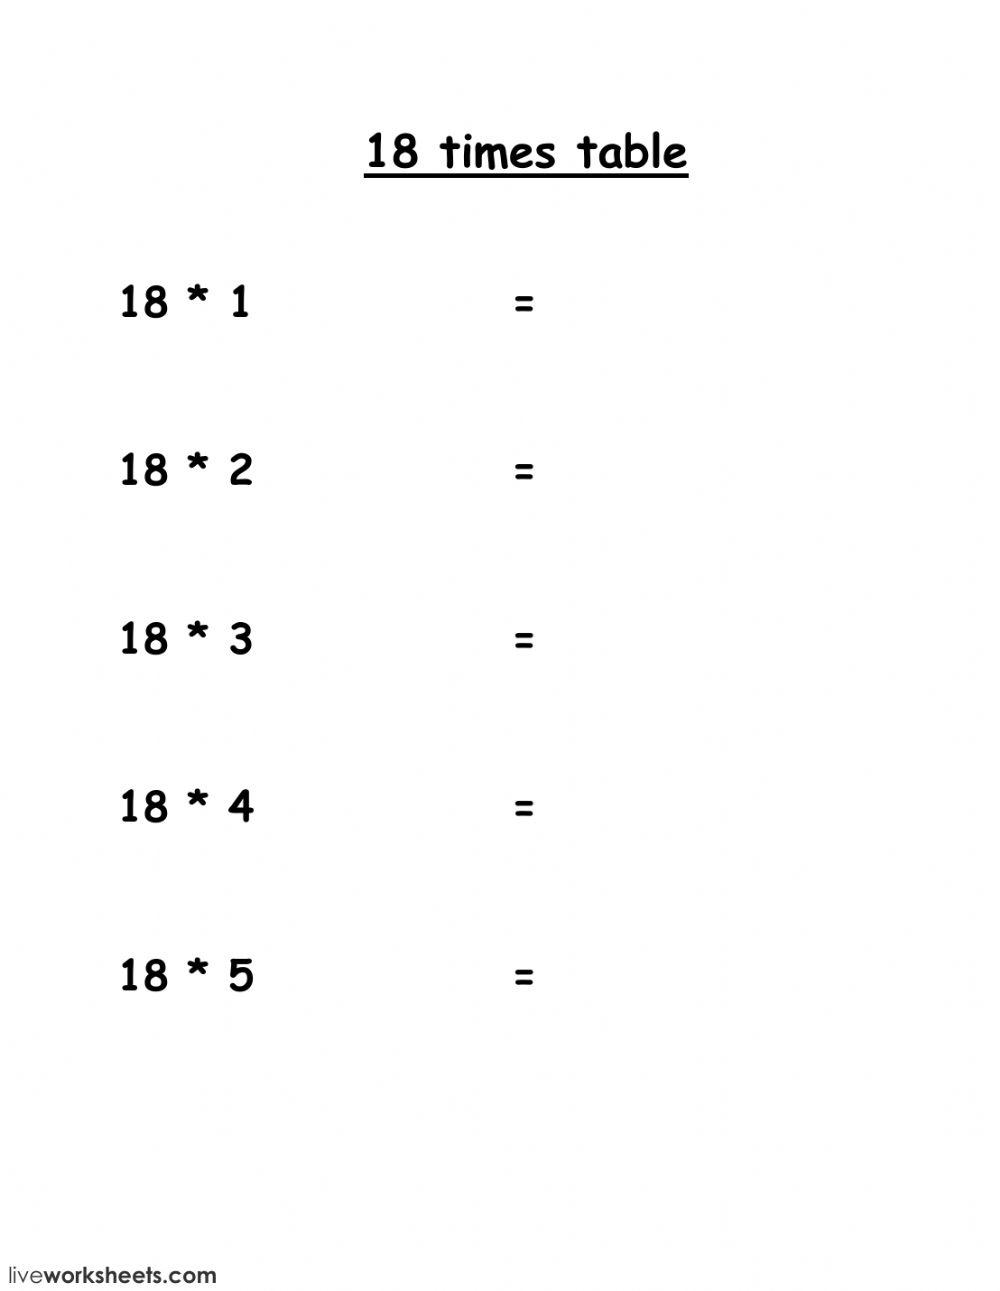 18 times table